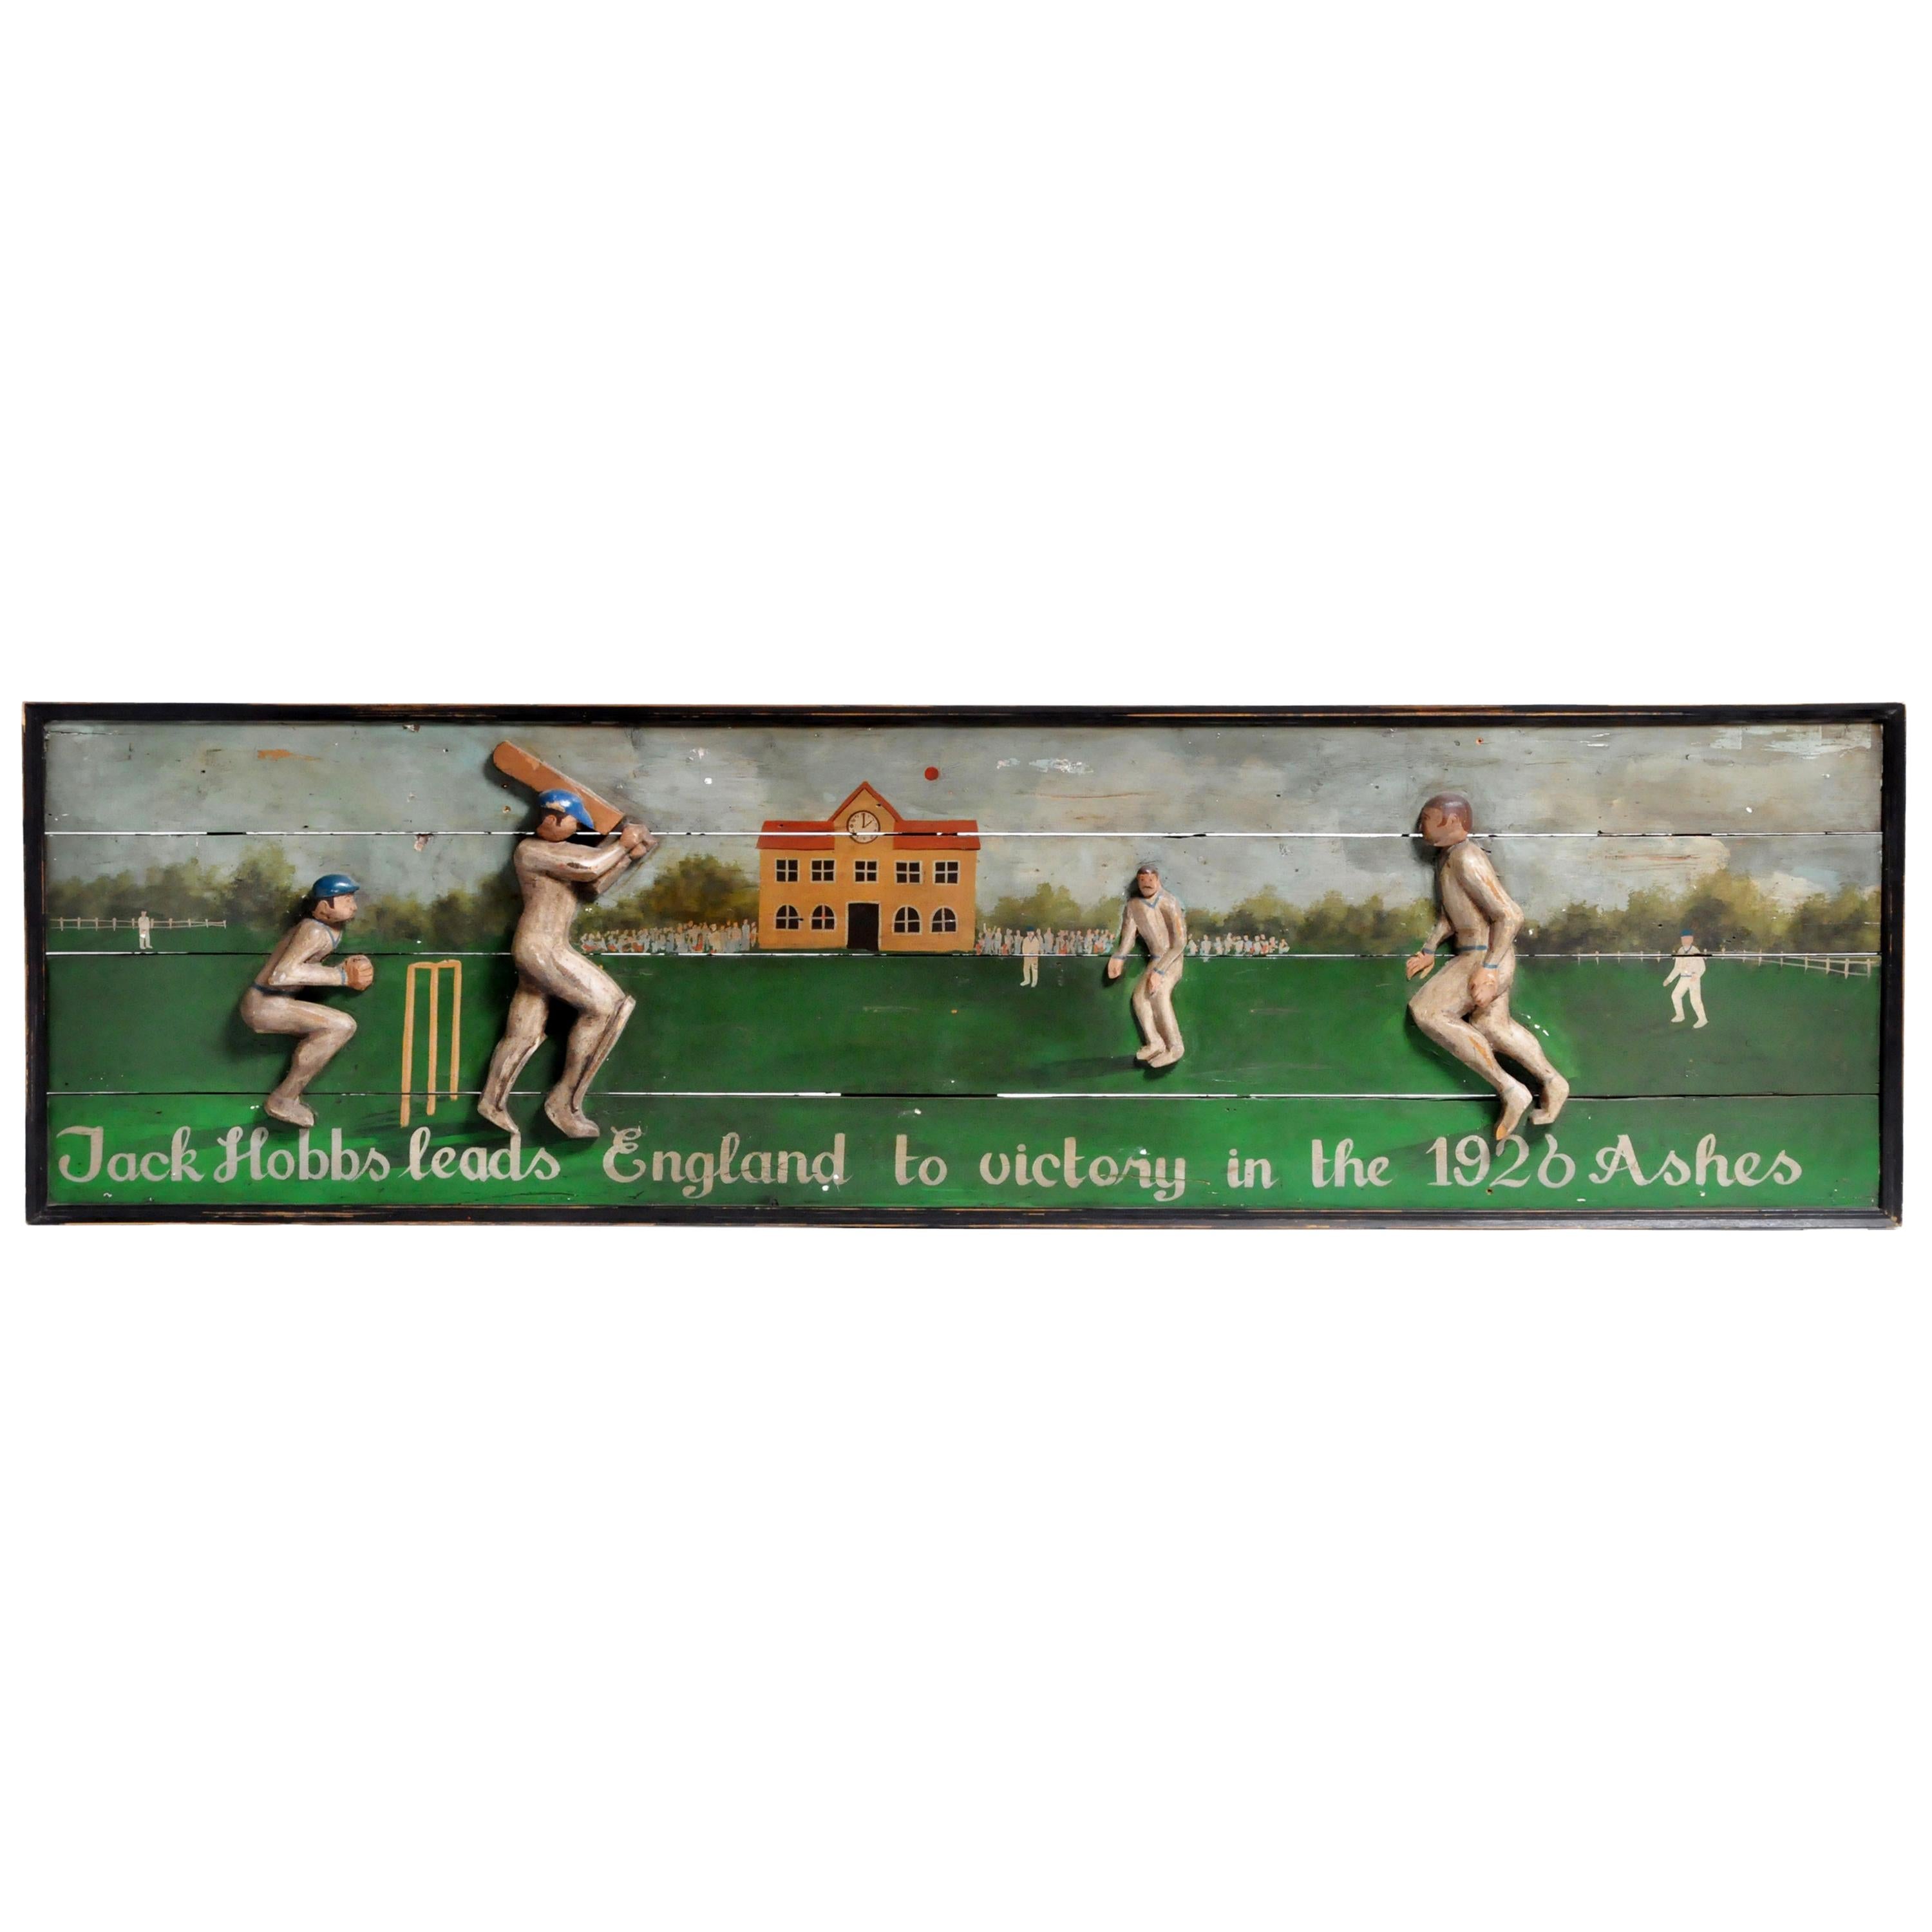 "Jack Hobbs leads England to victory in the 1926 Ashes" Wood Carved Panel